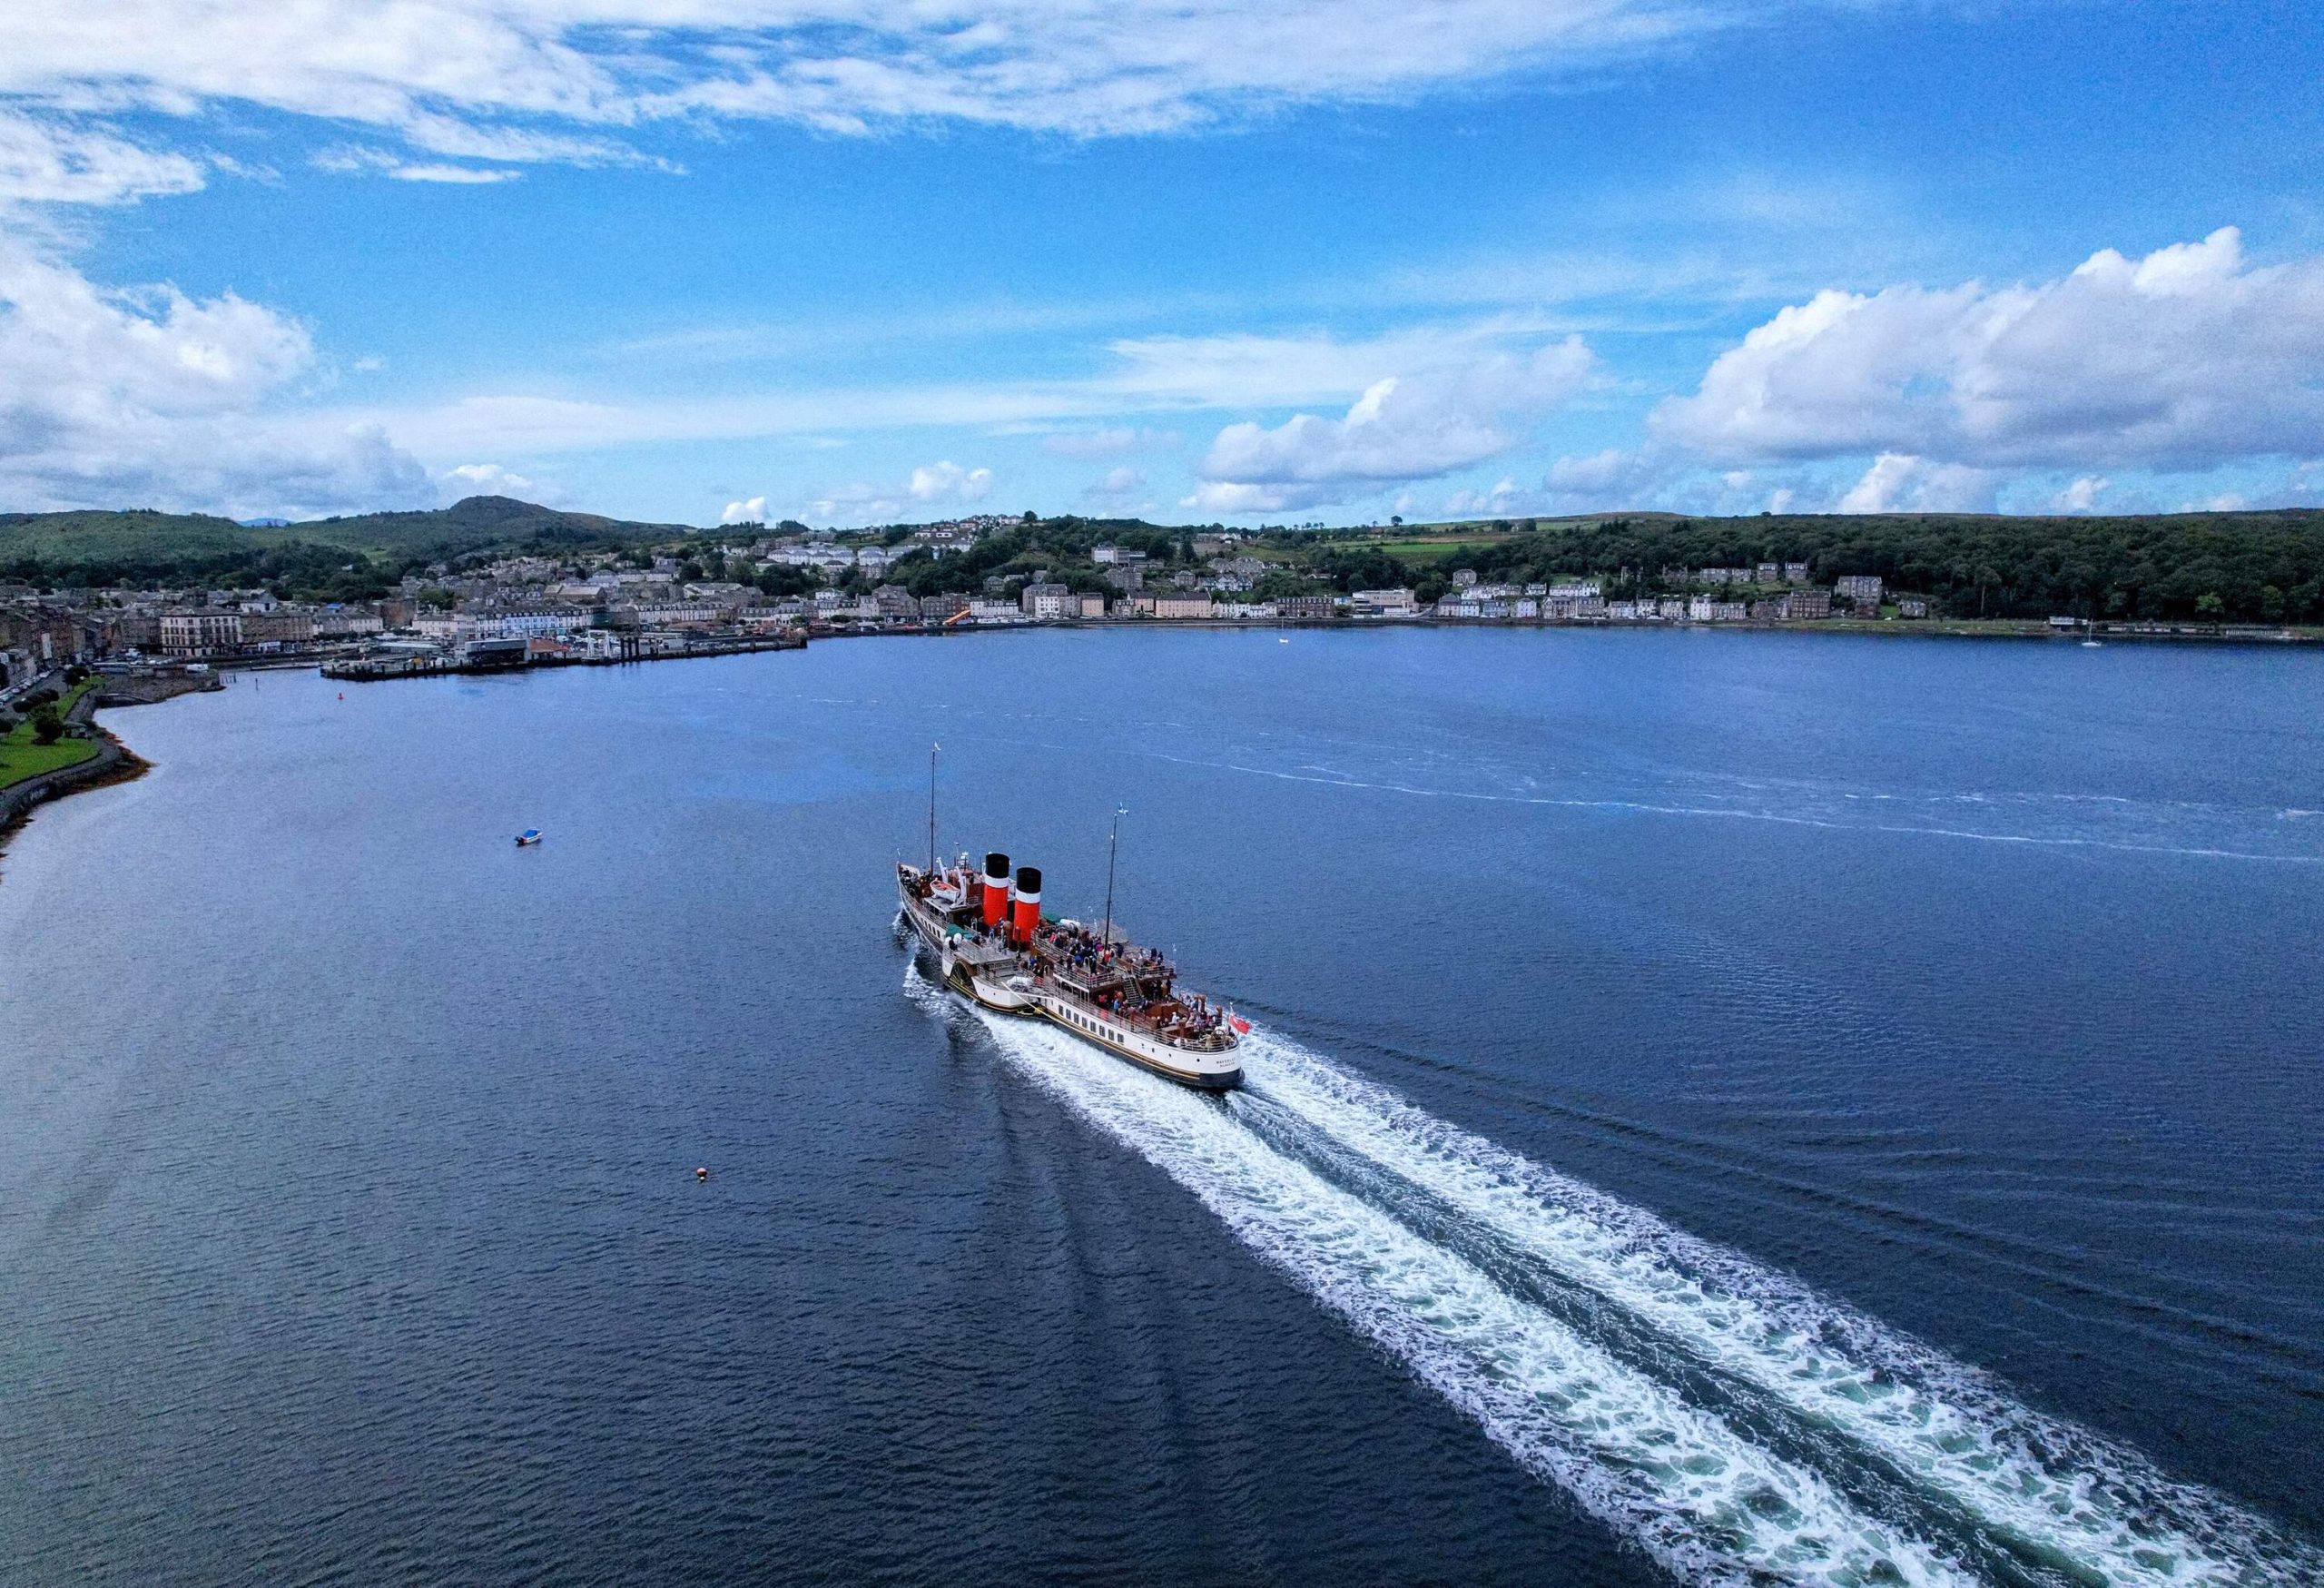 Arriving into the Bute port on a Clyde Cruise